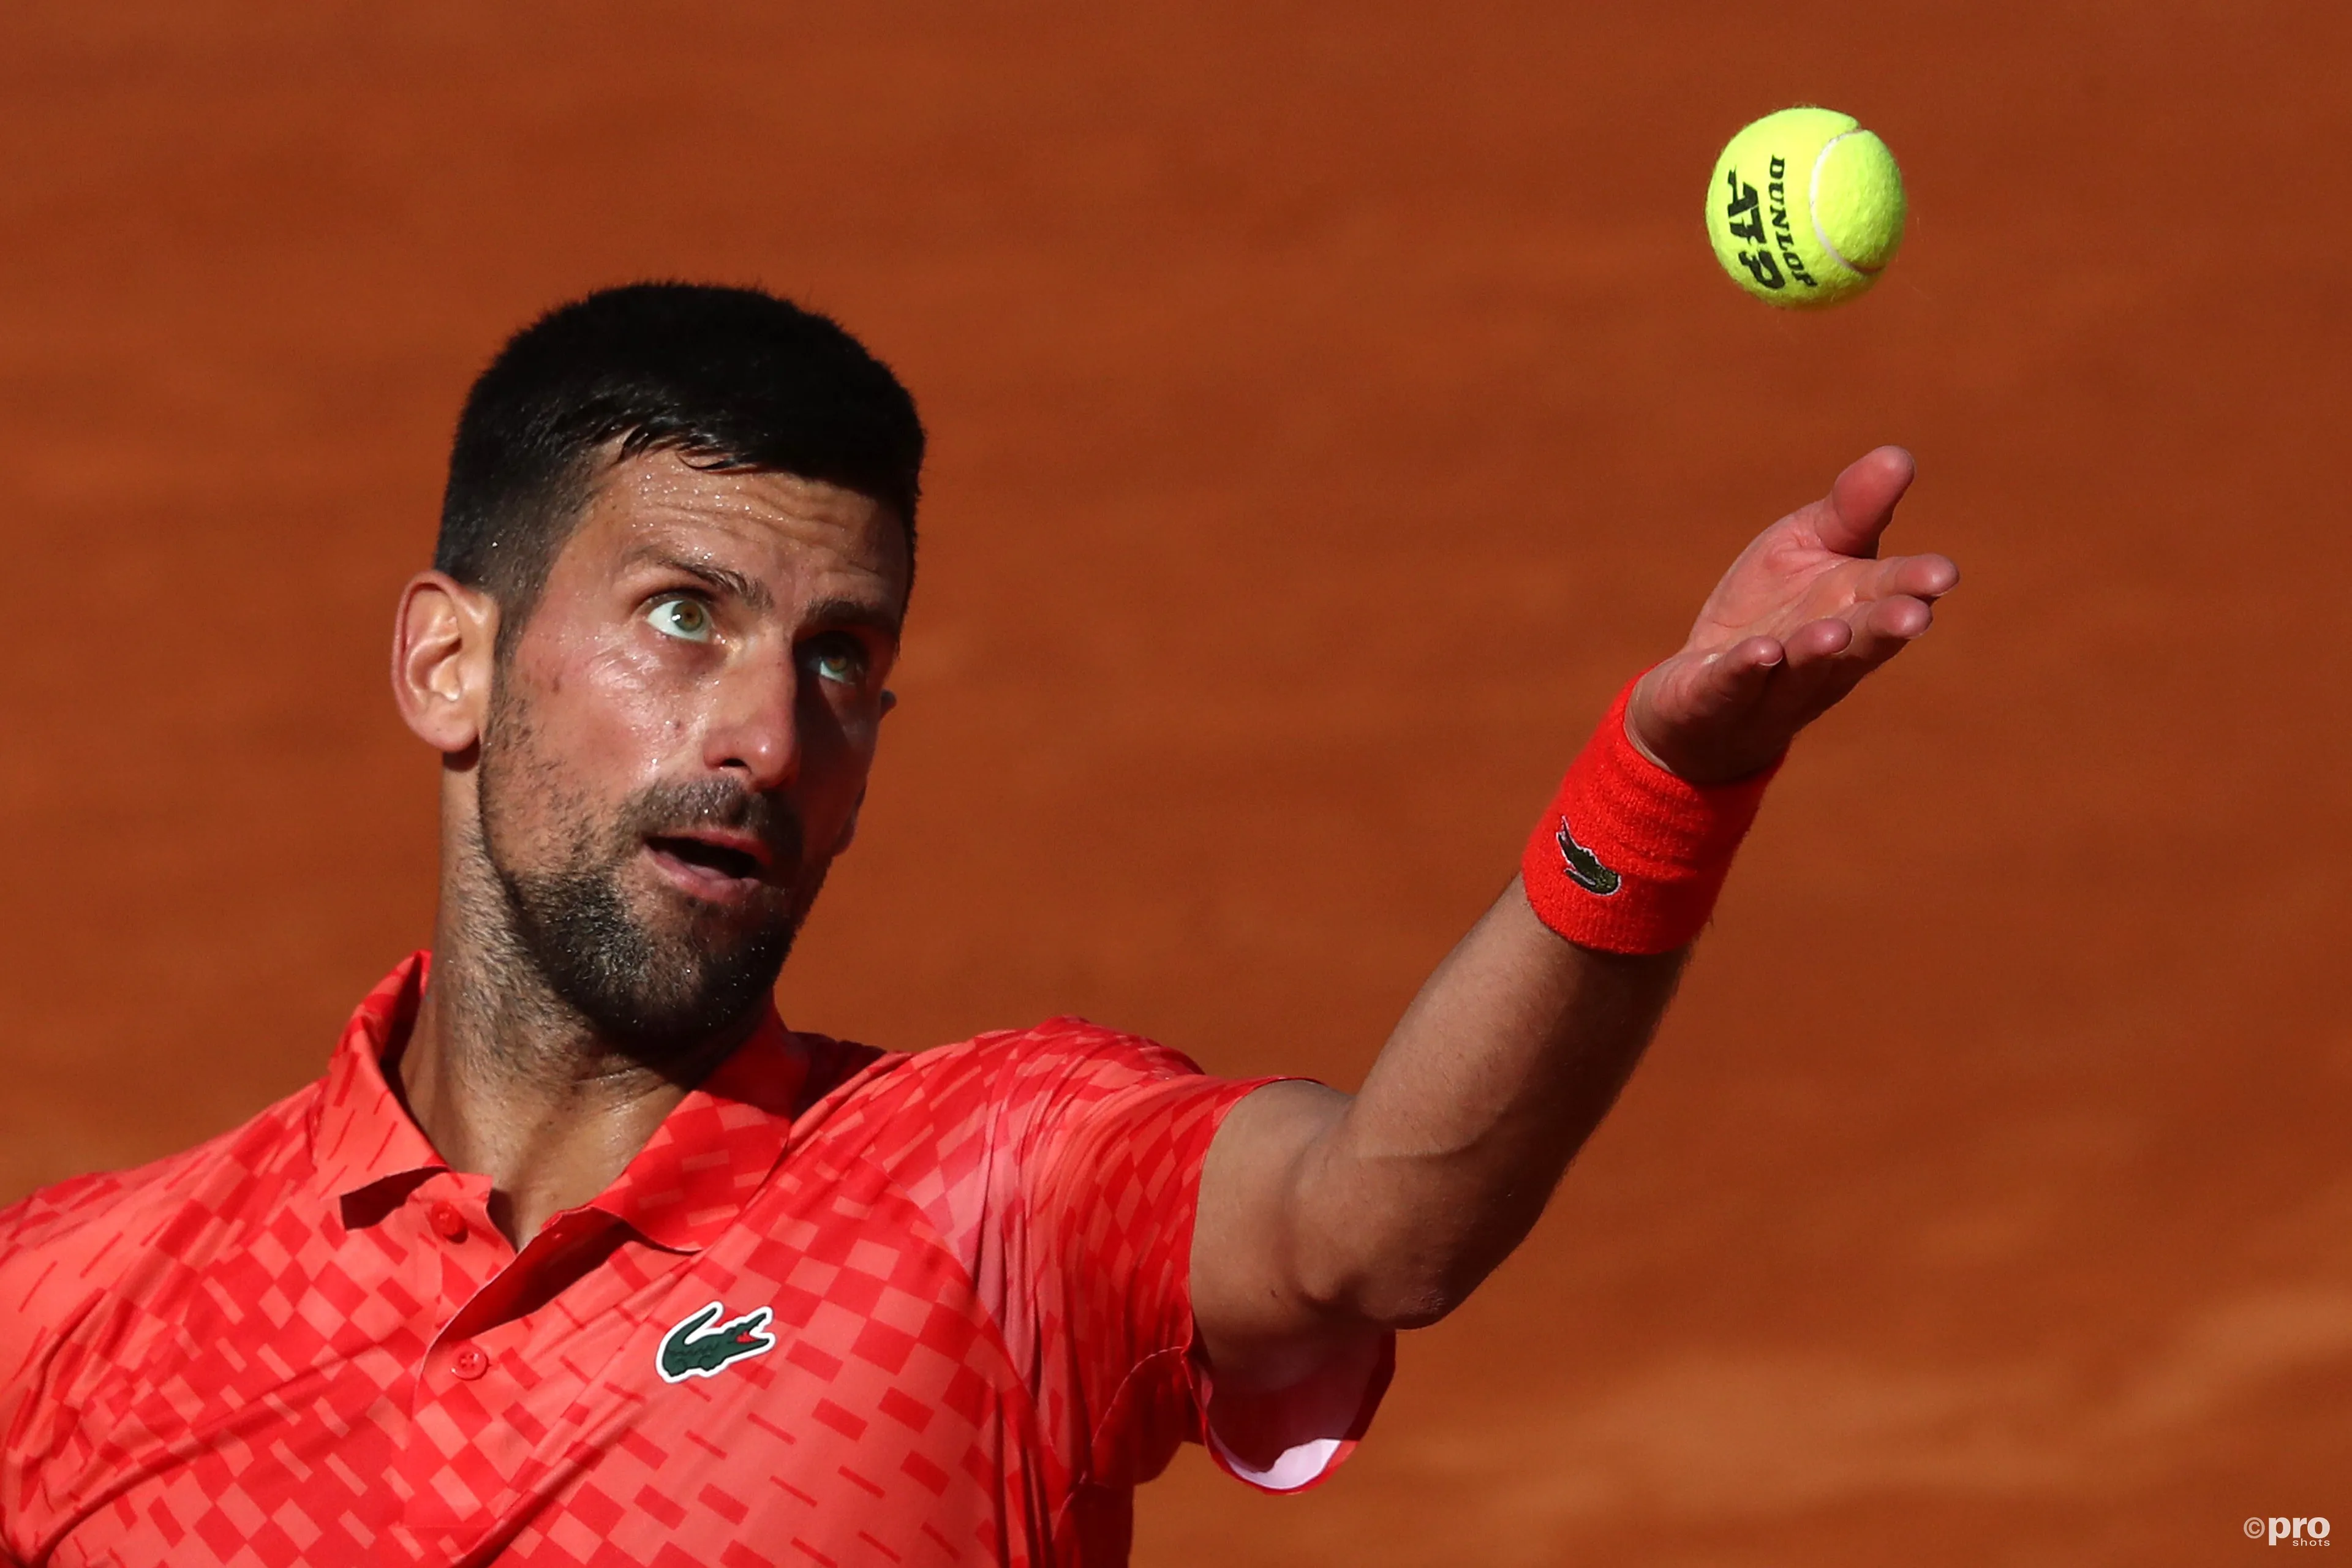 Djokovic will make his debut against Pierre-Hugues Herbert (No. 142). The Serbian has a record 93-16 (85%) at the French Open.